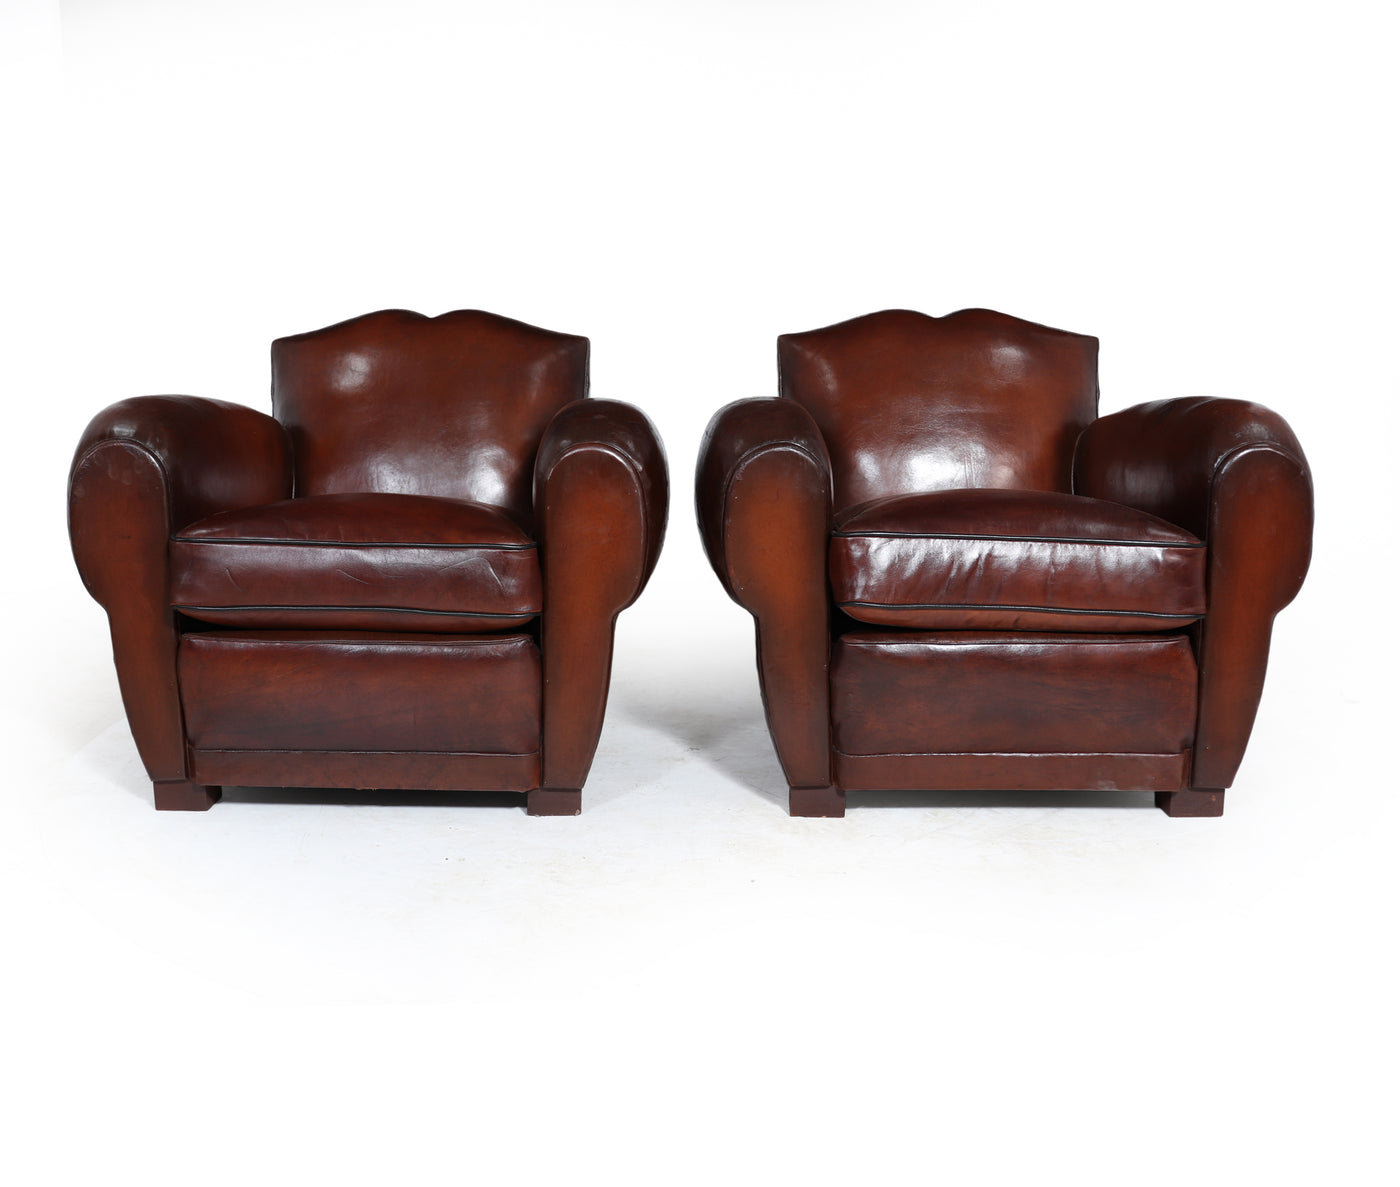 Pair of 1930’s Moustache Back French Leather Club Chairs